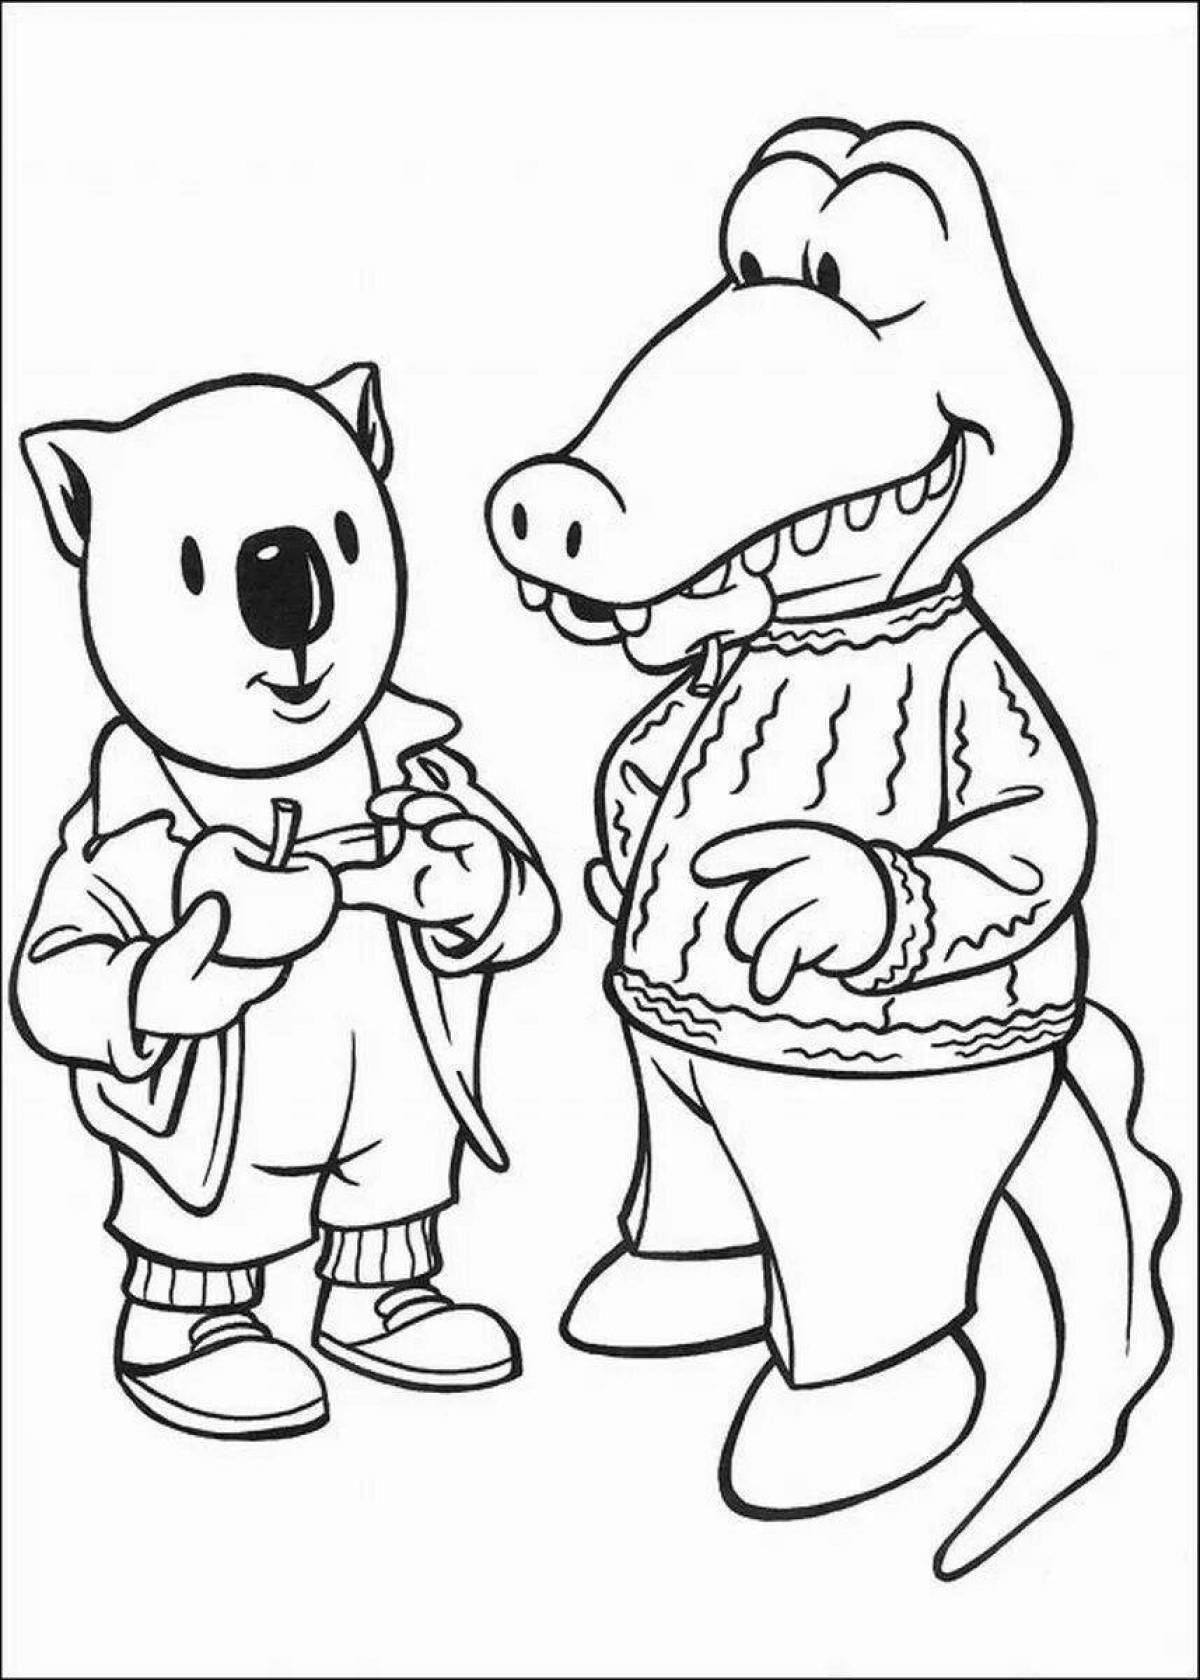 Luminous coloring pages koala brothers